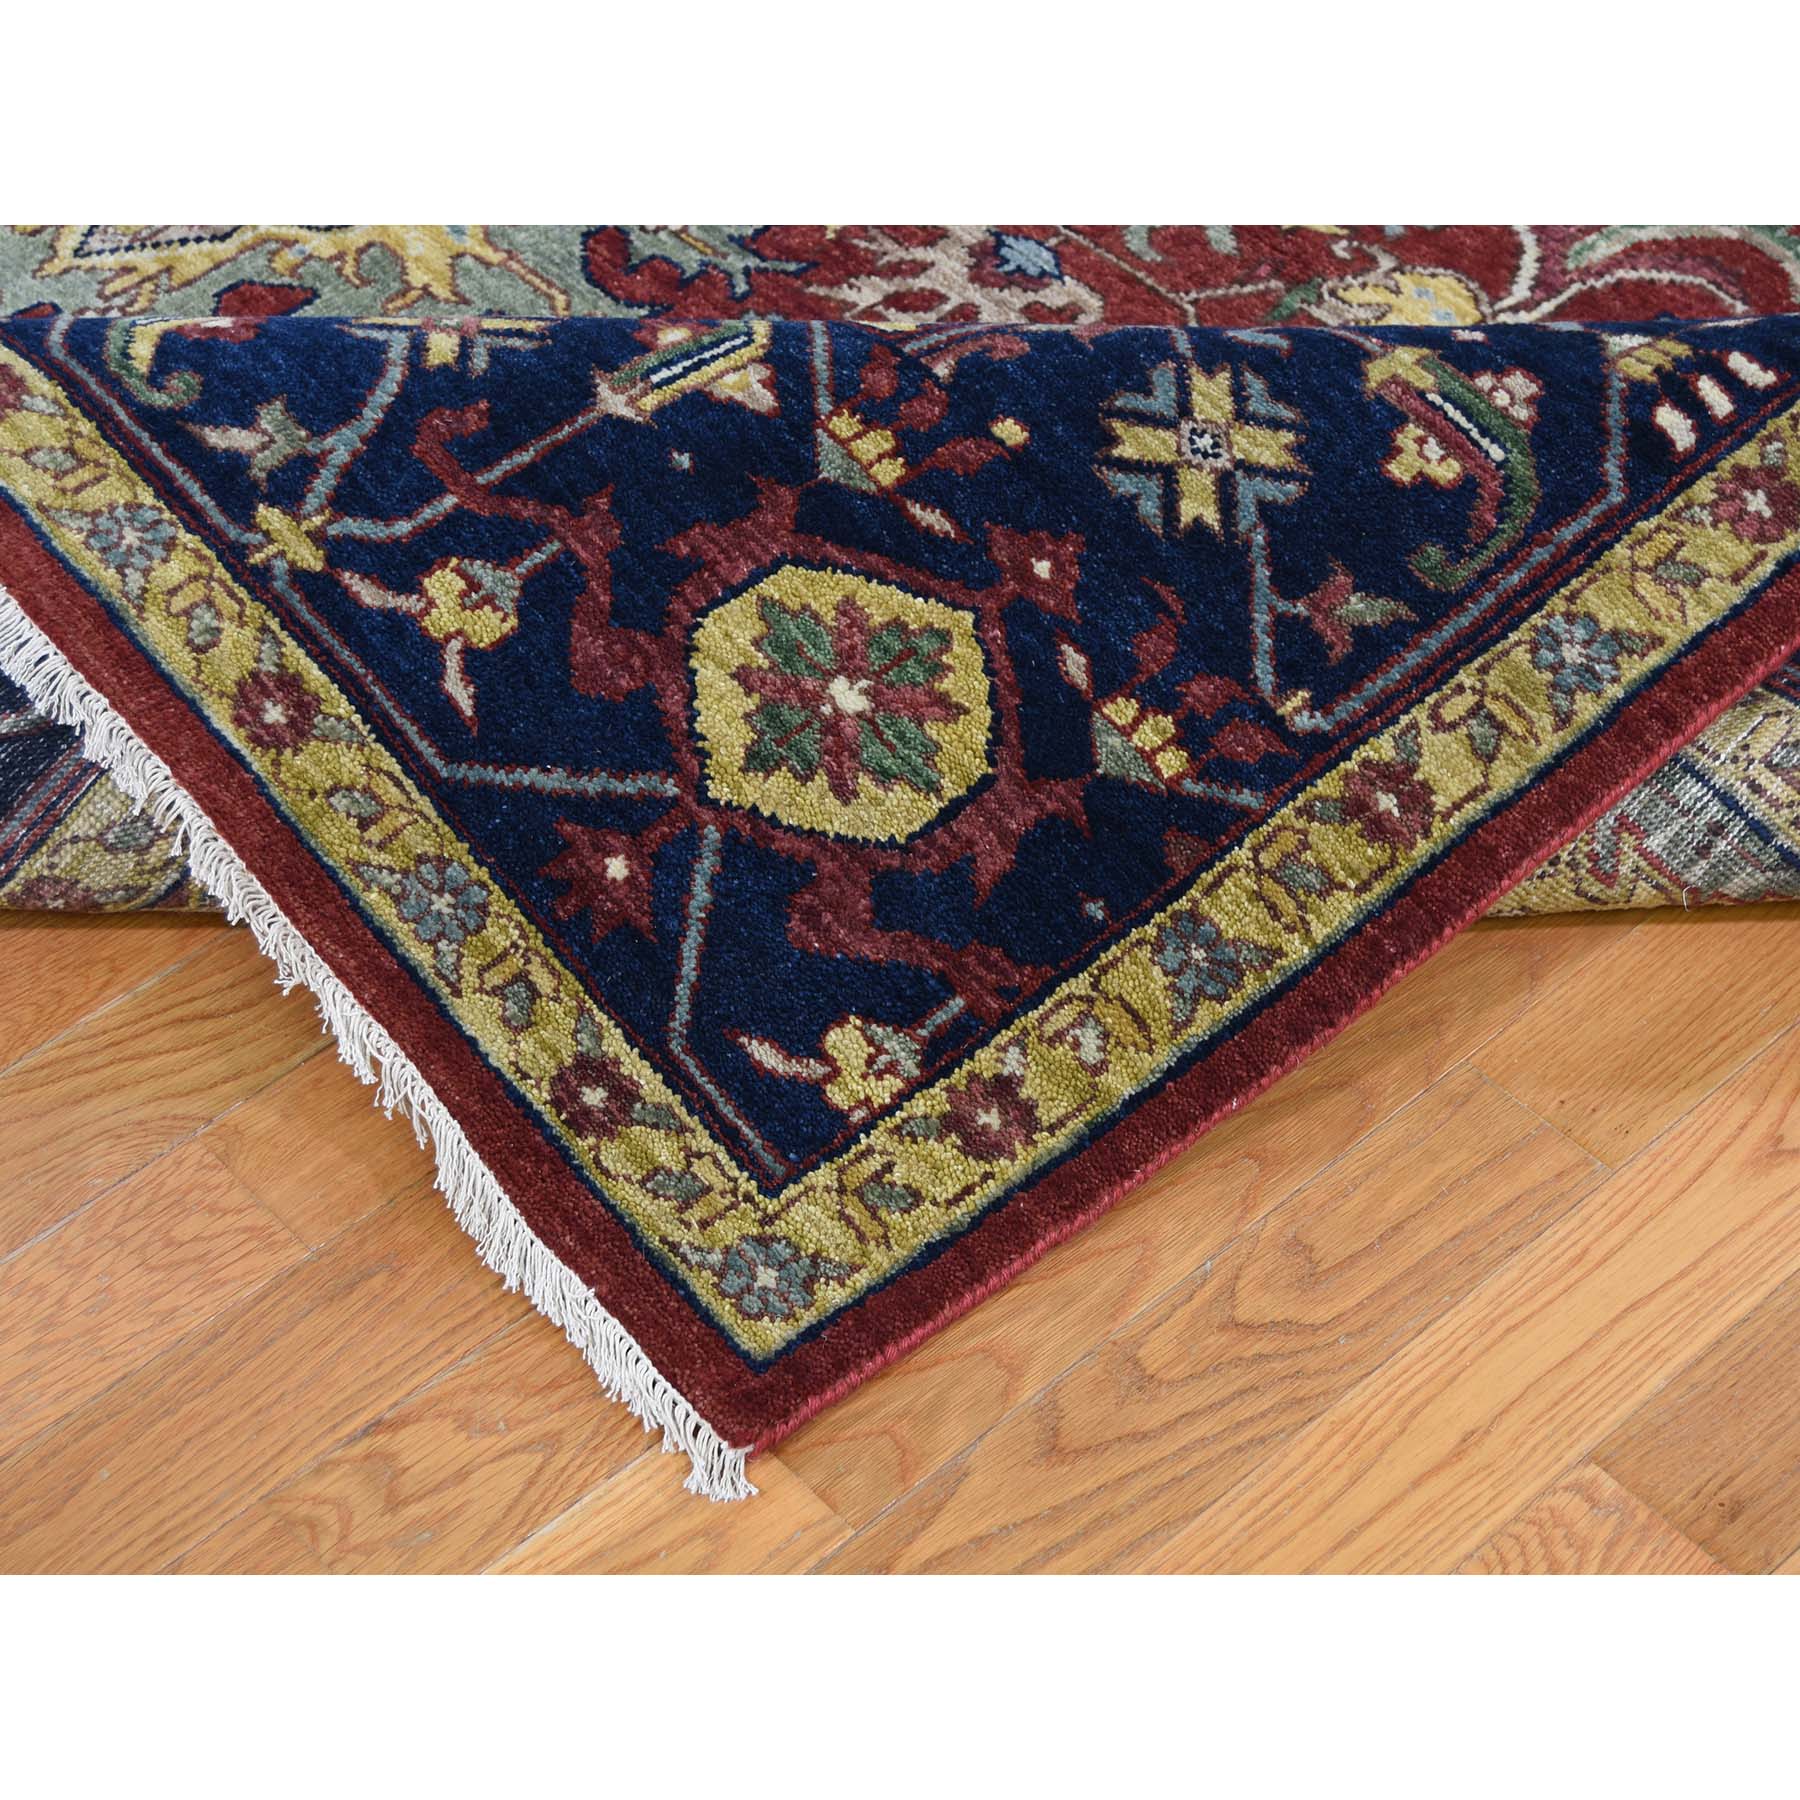 8-10 x12-2  Red Heriz Revival Pure Wool Hand-Knotted Oriental Rug 